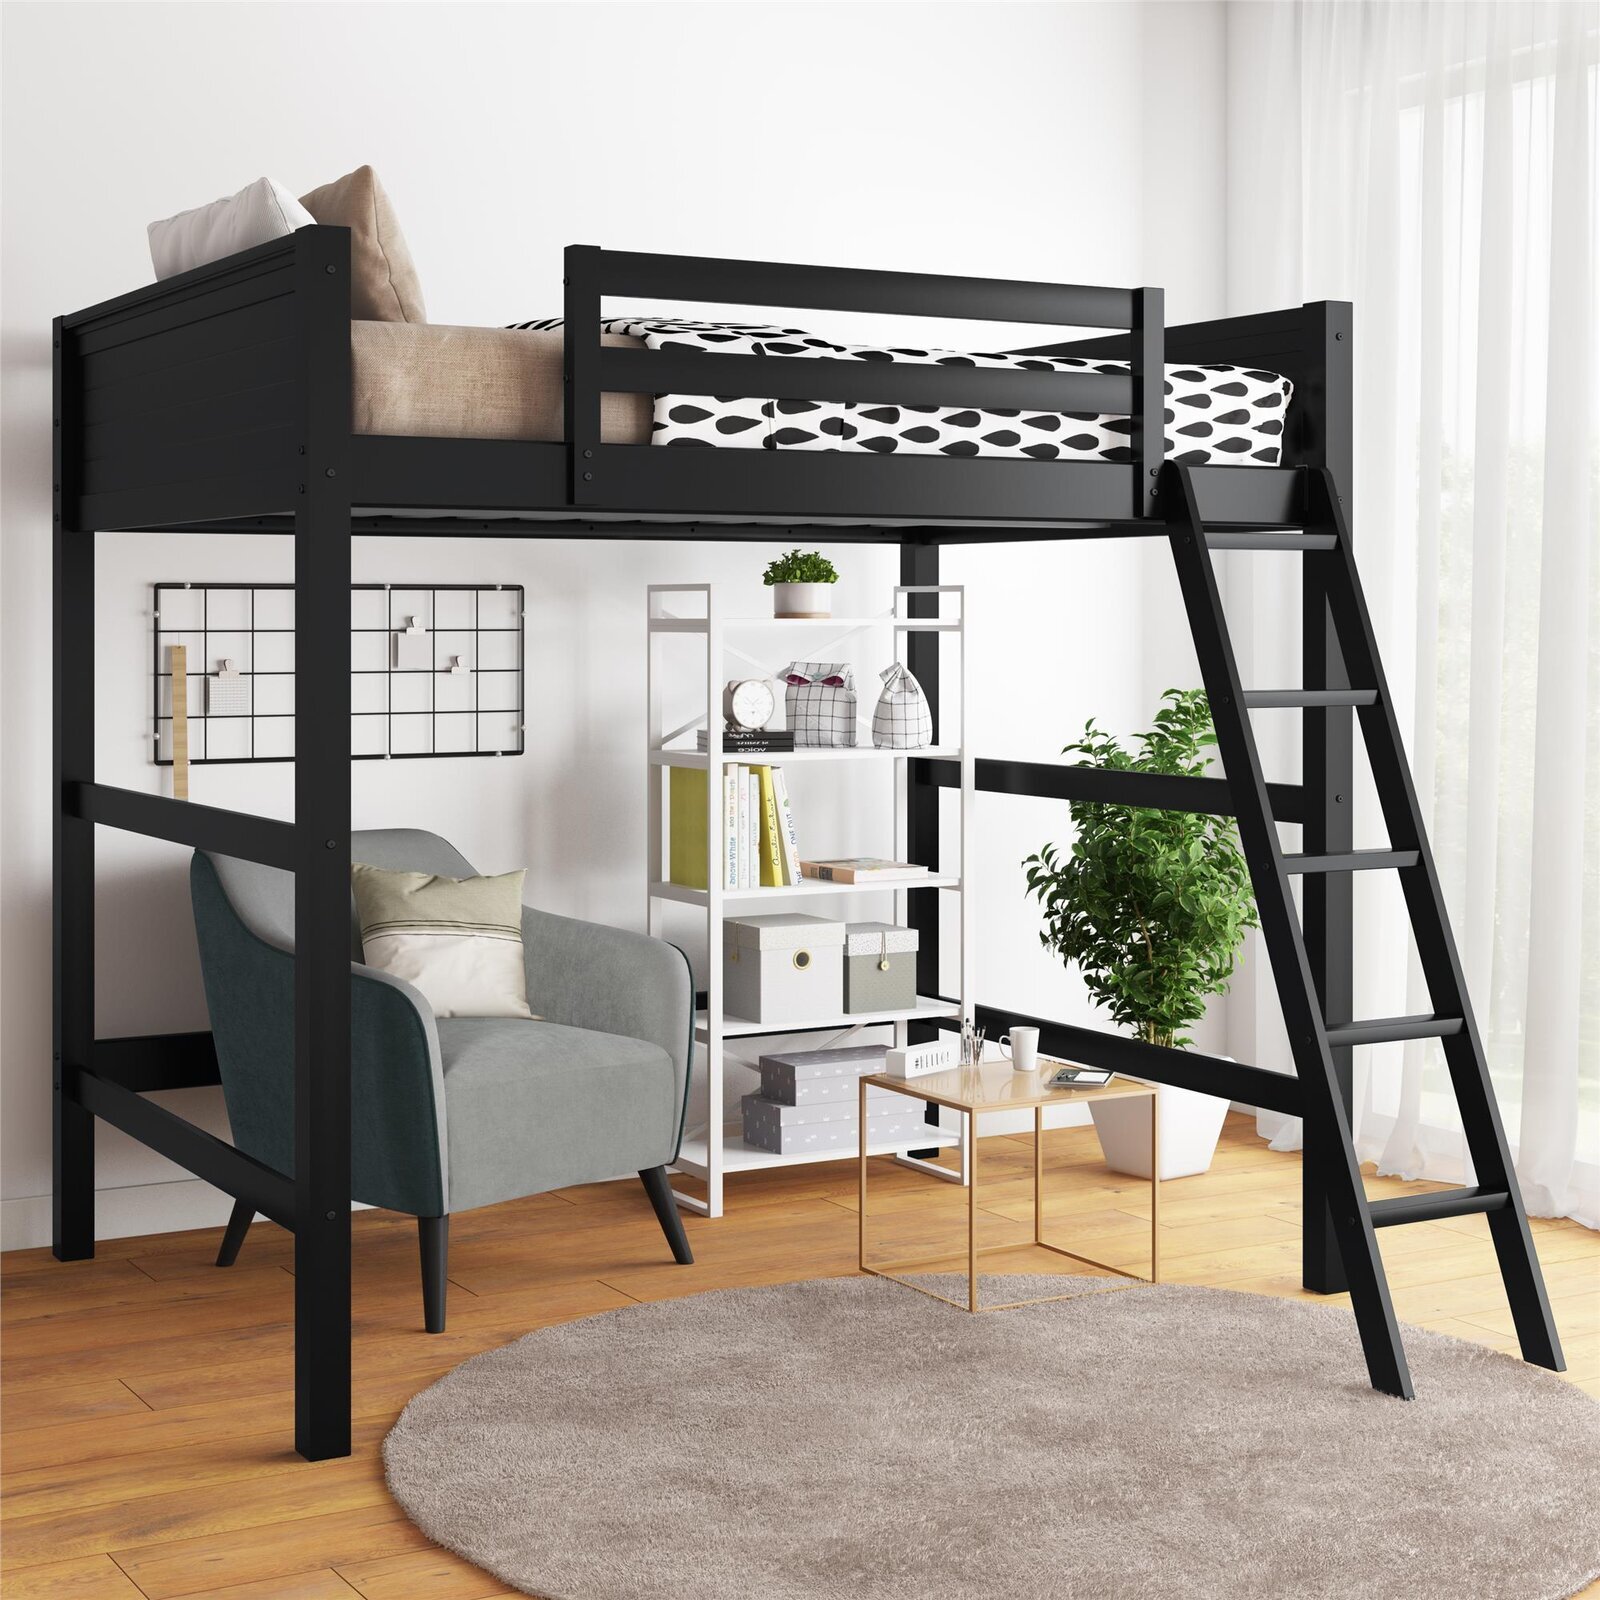 Wood DIY Full Loft Bed with Desk Space with Angled Built in Ladder